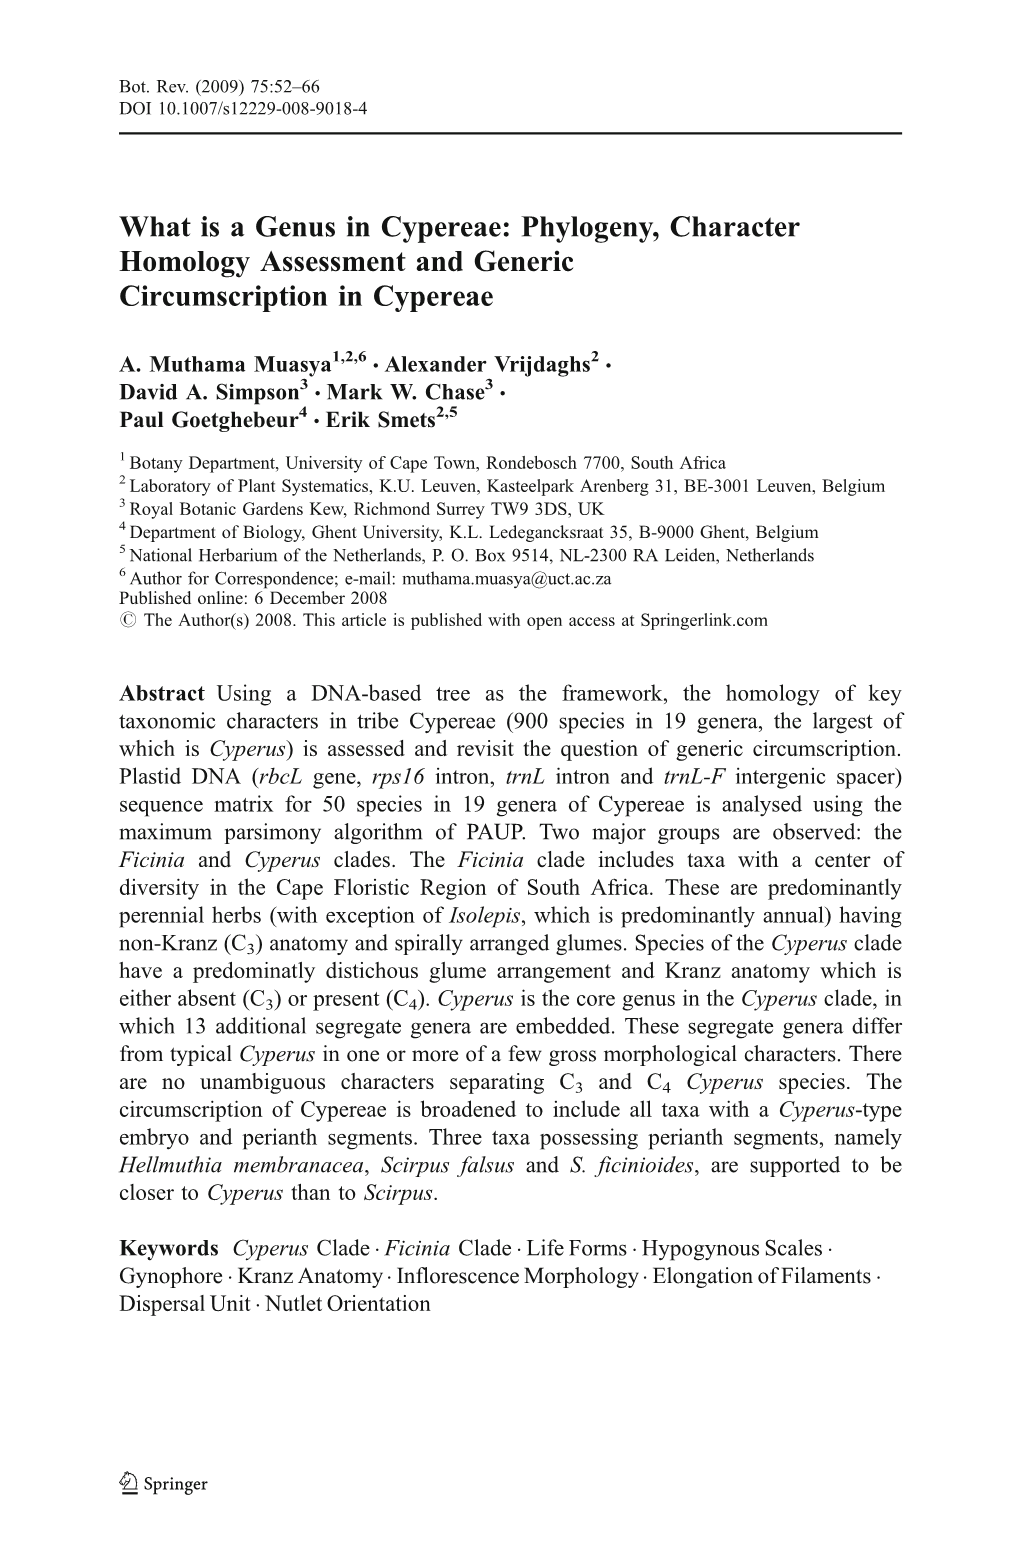 What Is a Genus in Cypereae: Phylogeny, Character Homology Assessment and Generic Circumscription in Cypereae